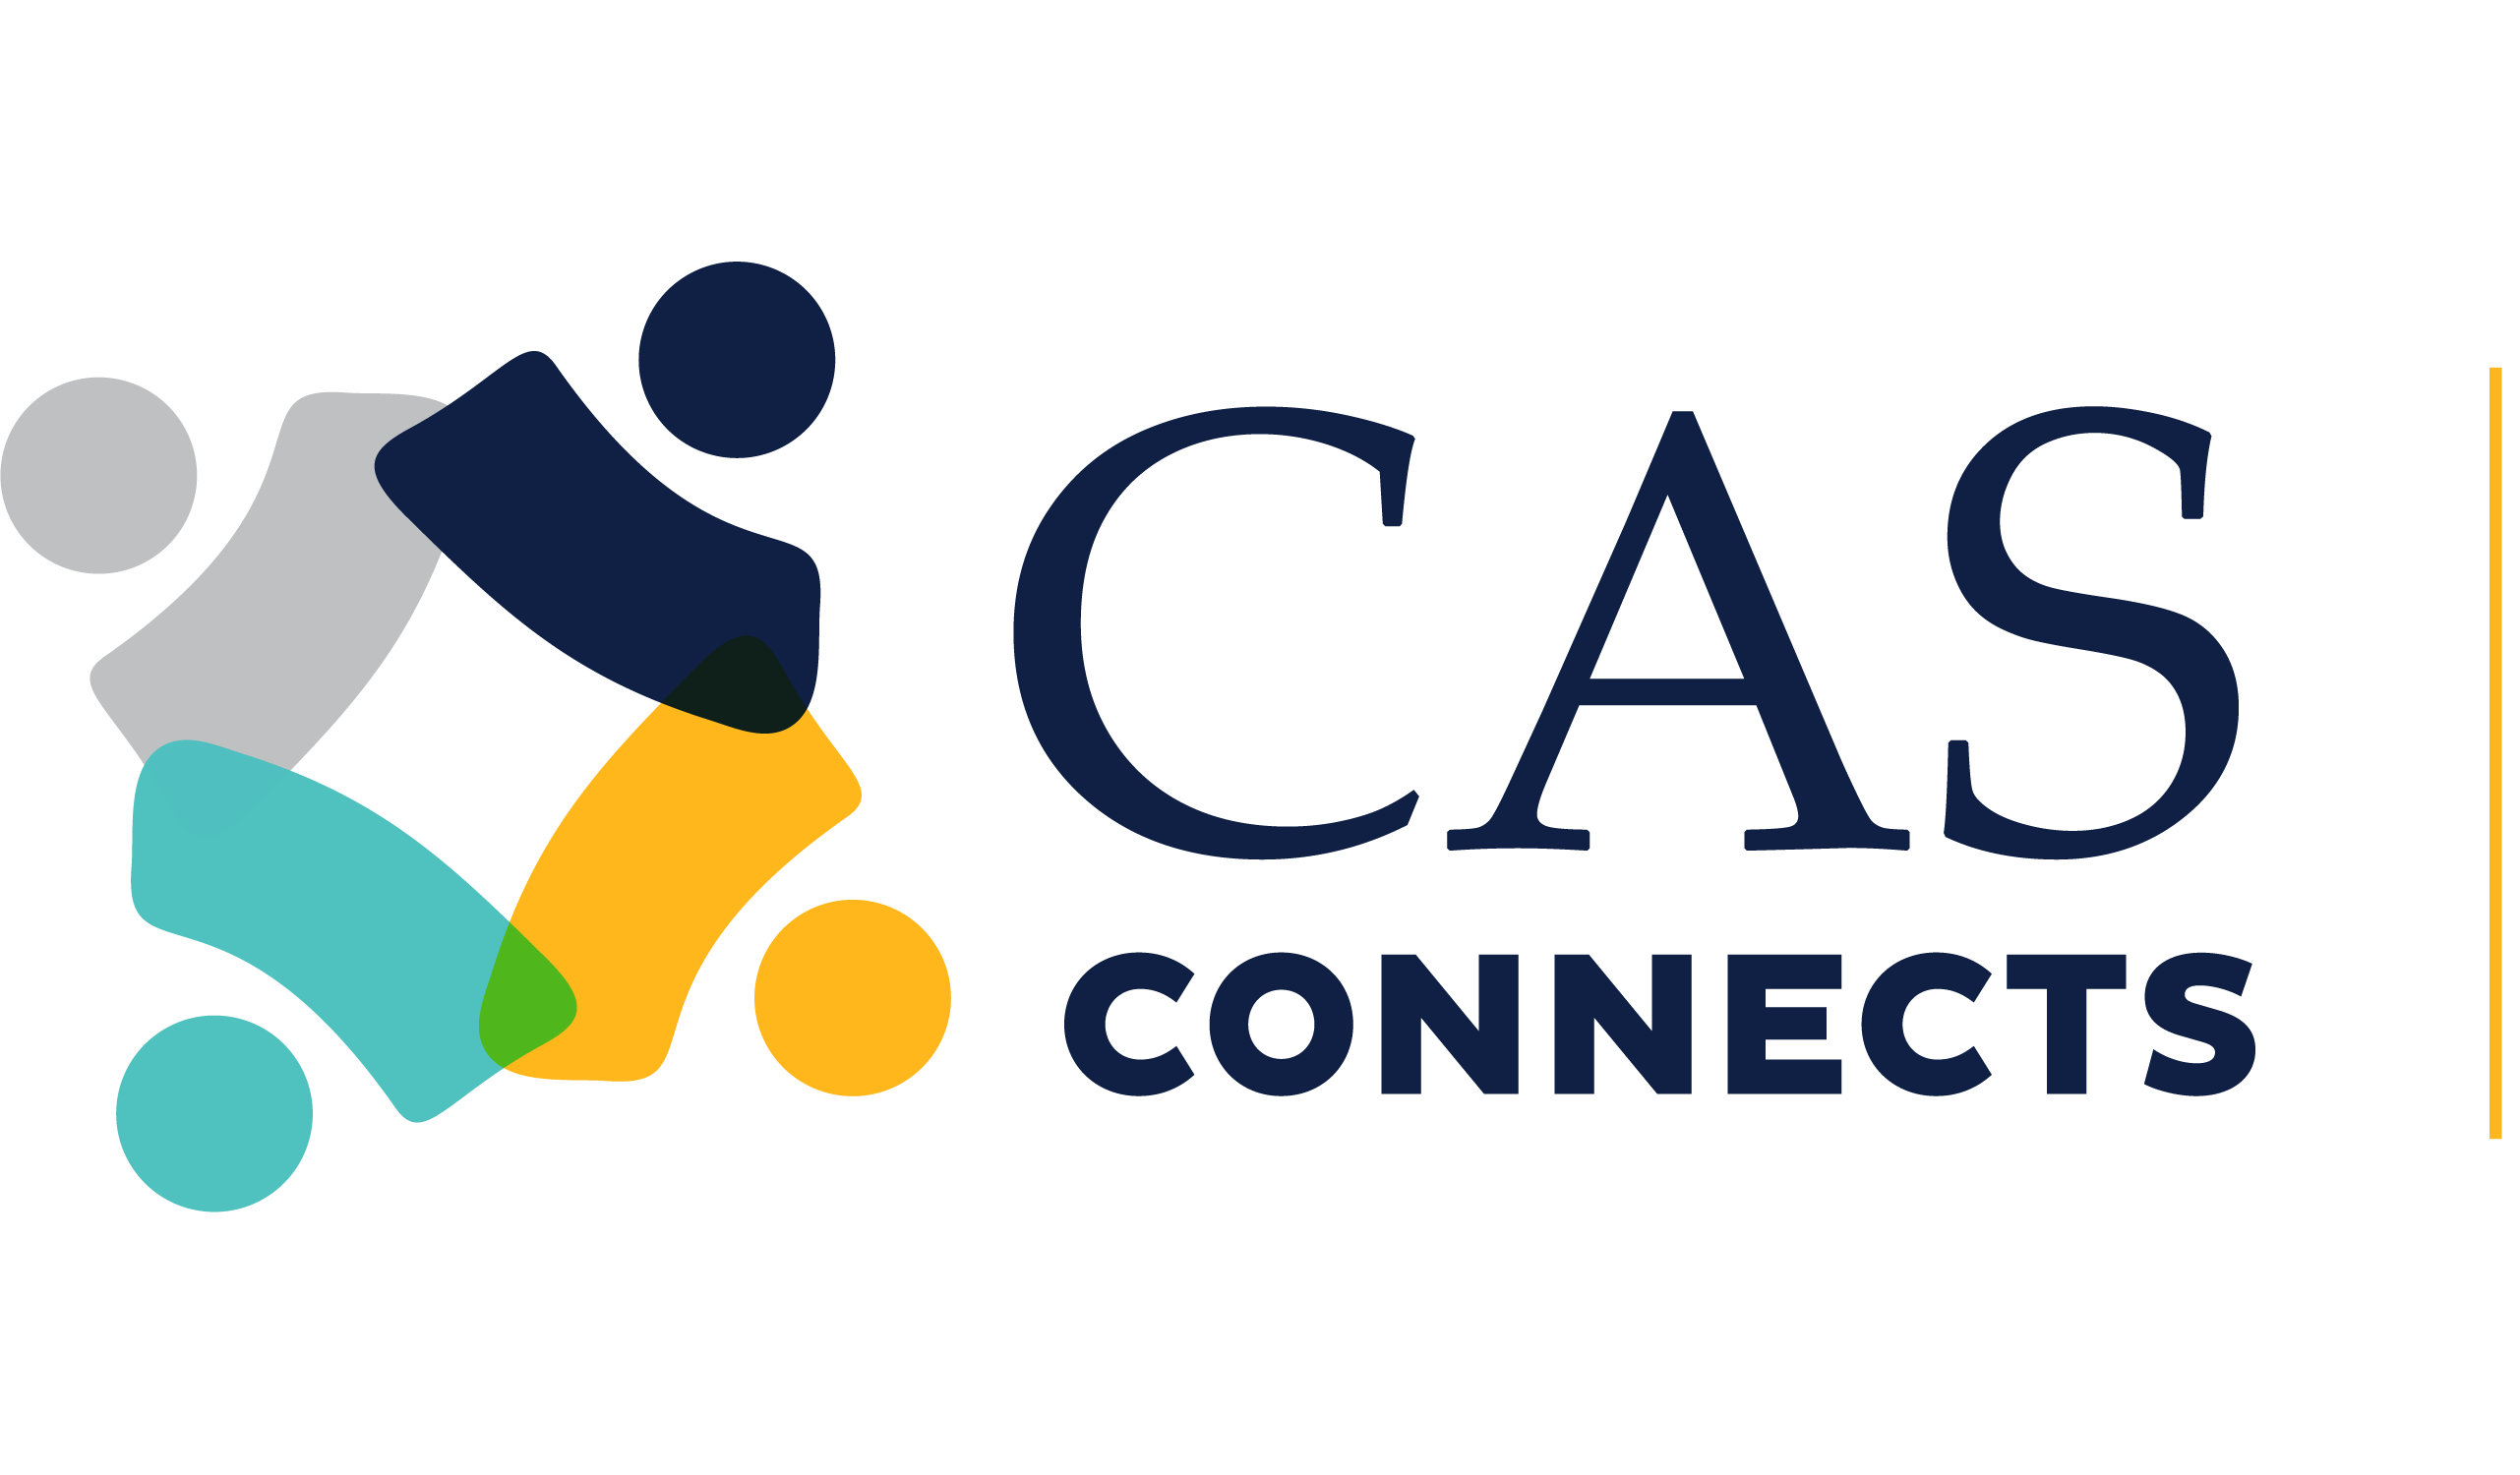 CASConnects logo